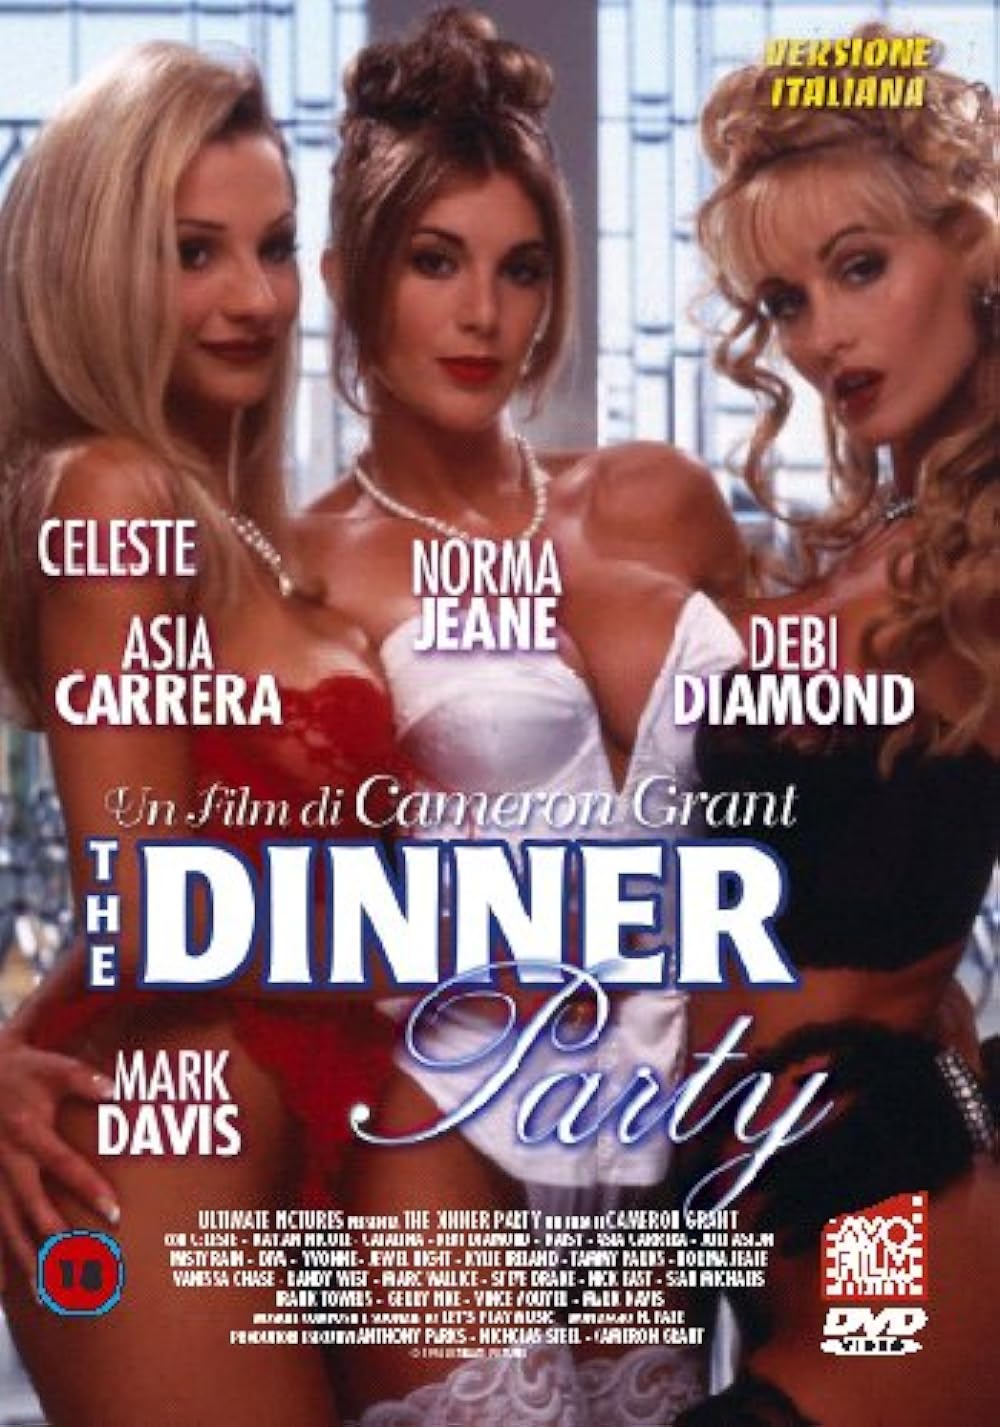 aiza oliva recommends the dinner party xxx pic